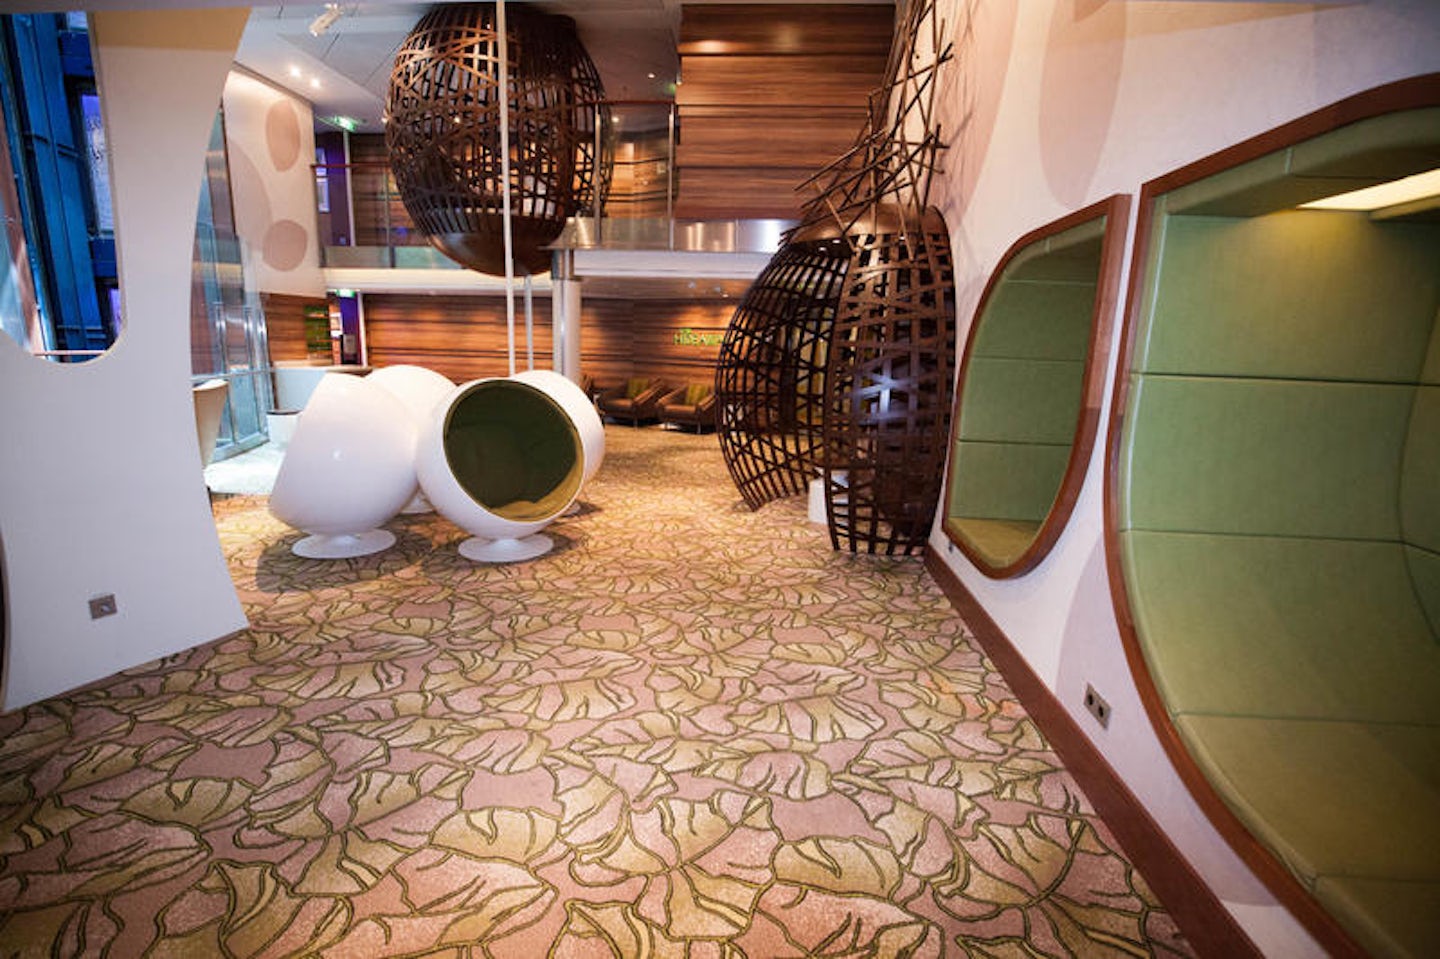 The Hideaway on Celebrity Reflection